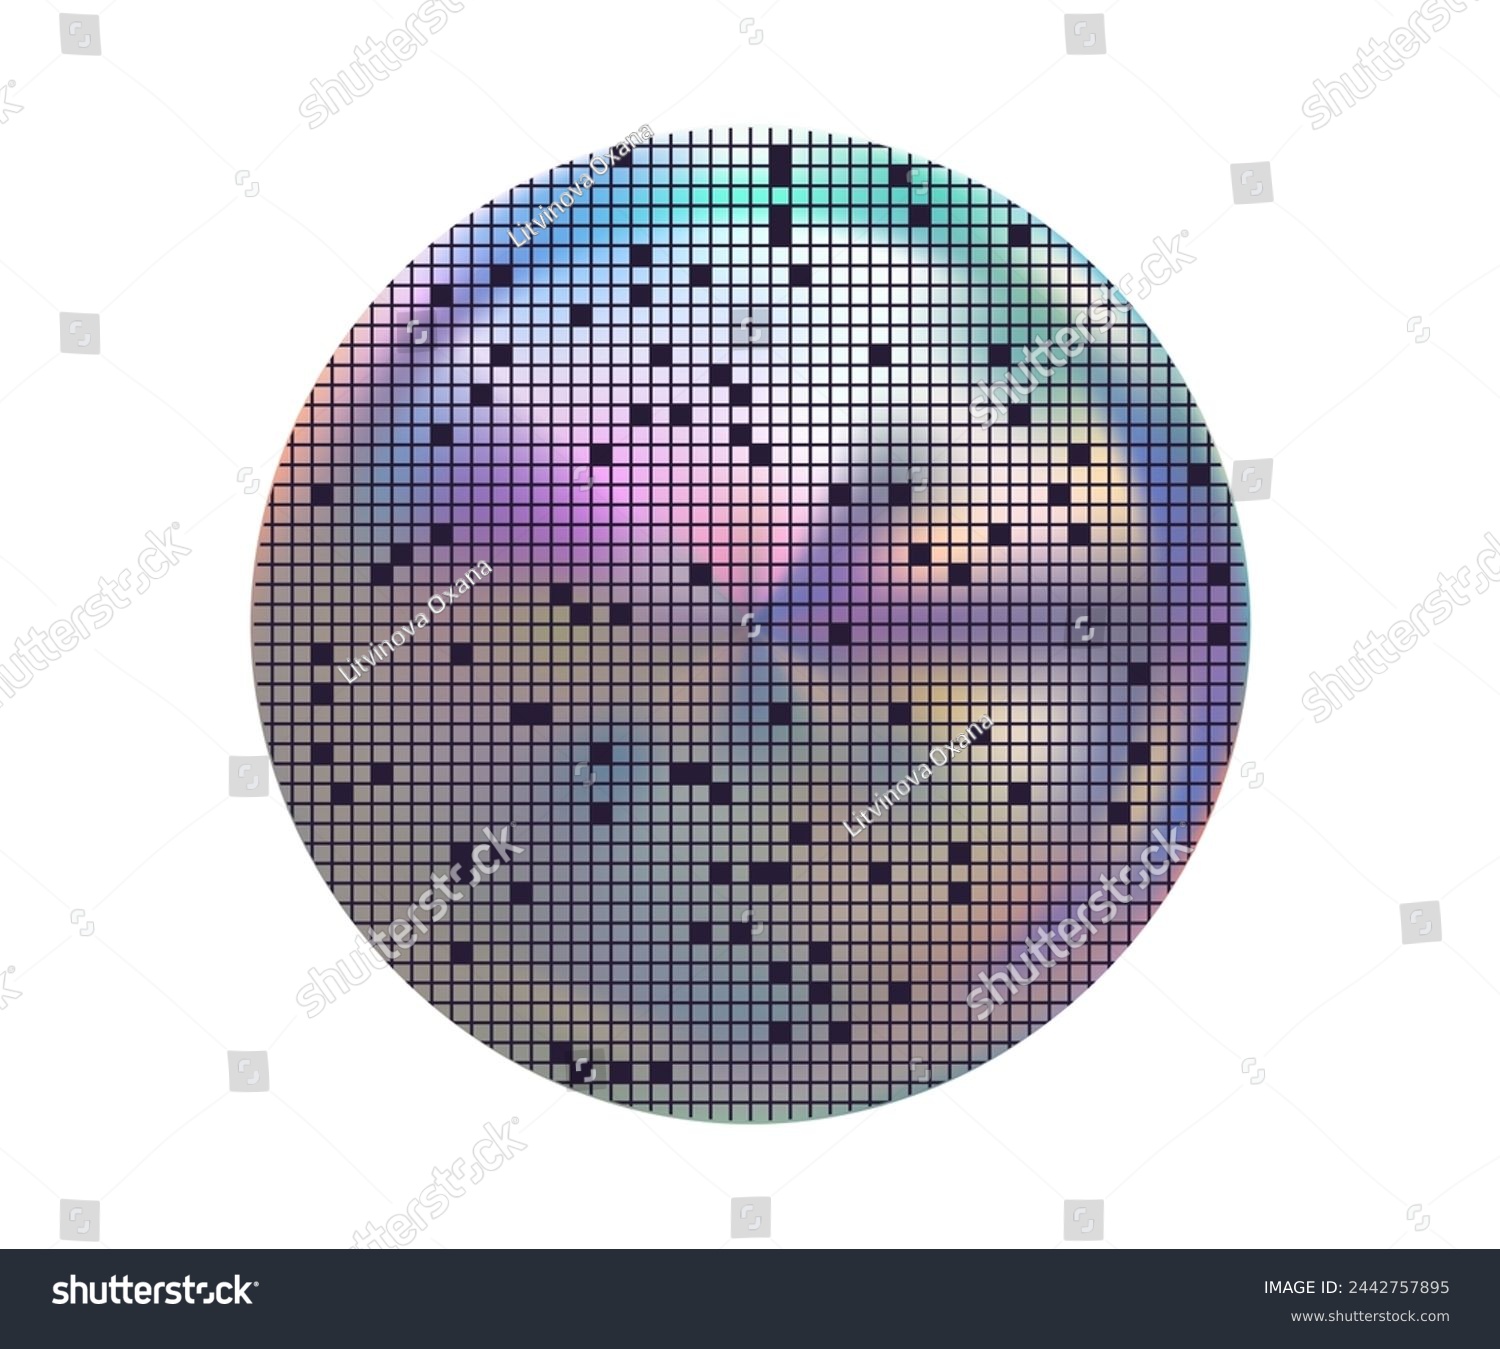 SVG of Polycrystalline silicon wafer with microchips and empty cells, isolated on a white background. Microelectronic device for manufacturing integrated circuits. Computer SIM chips. Vector illustration svg